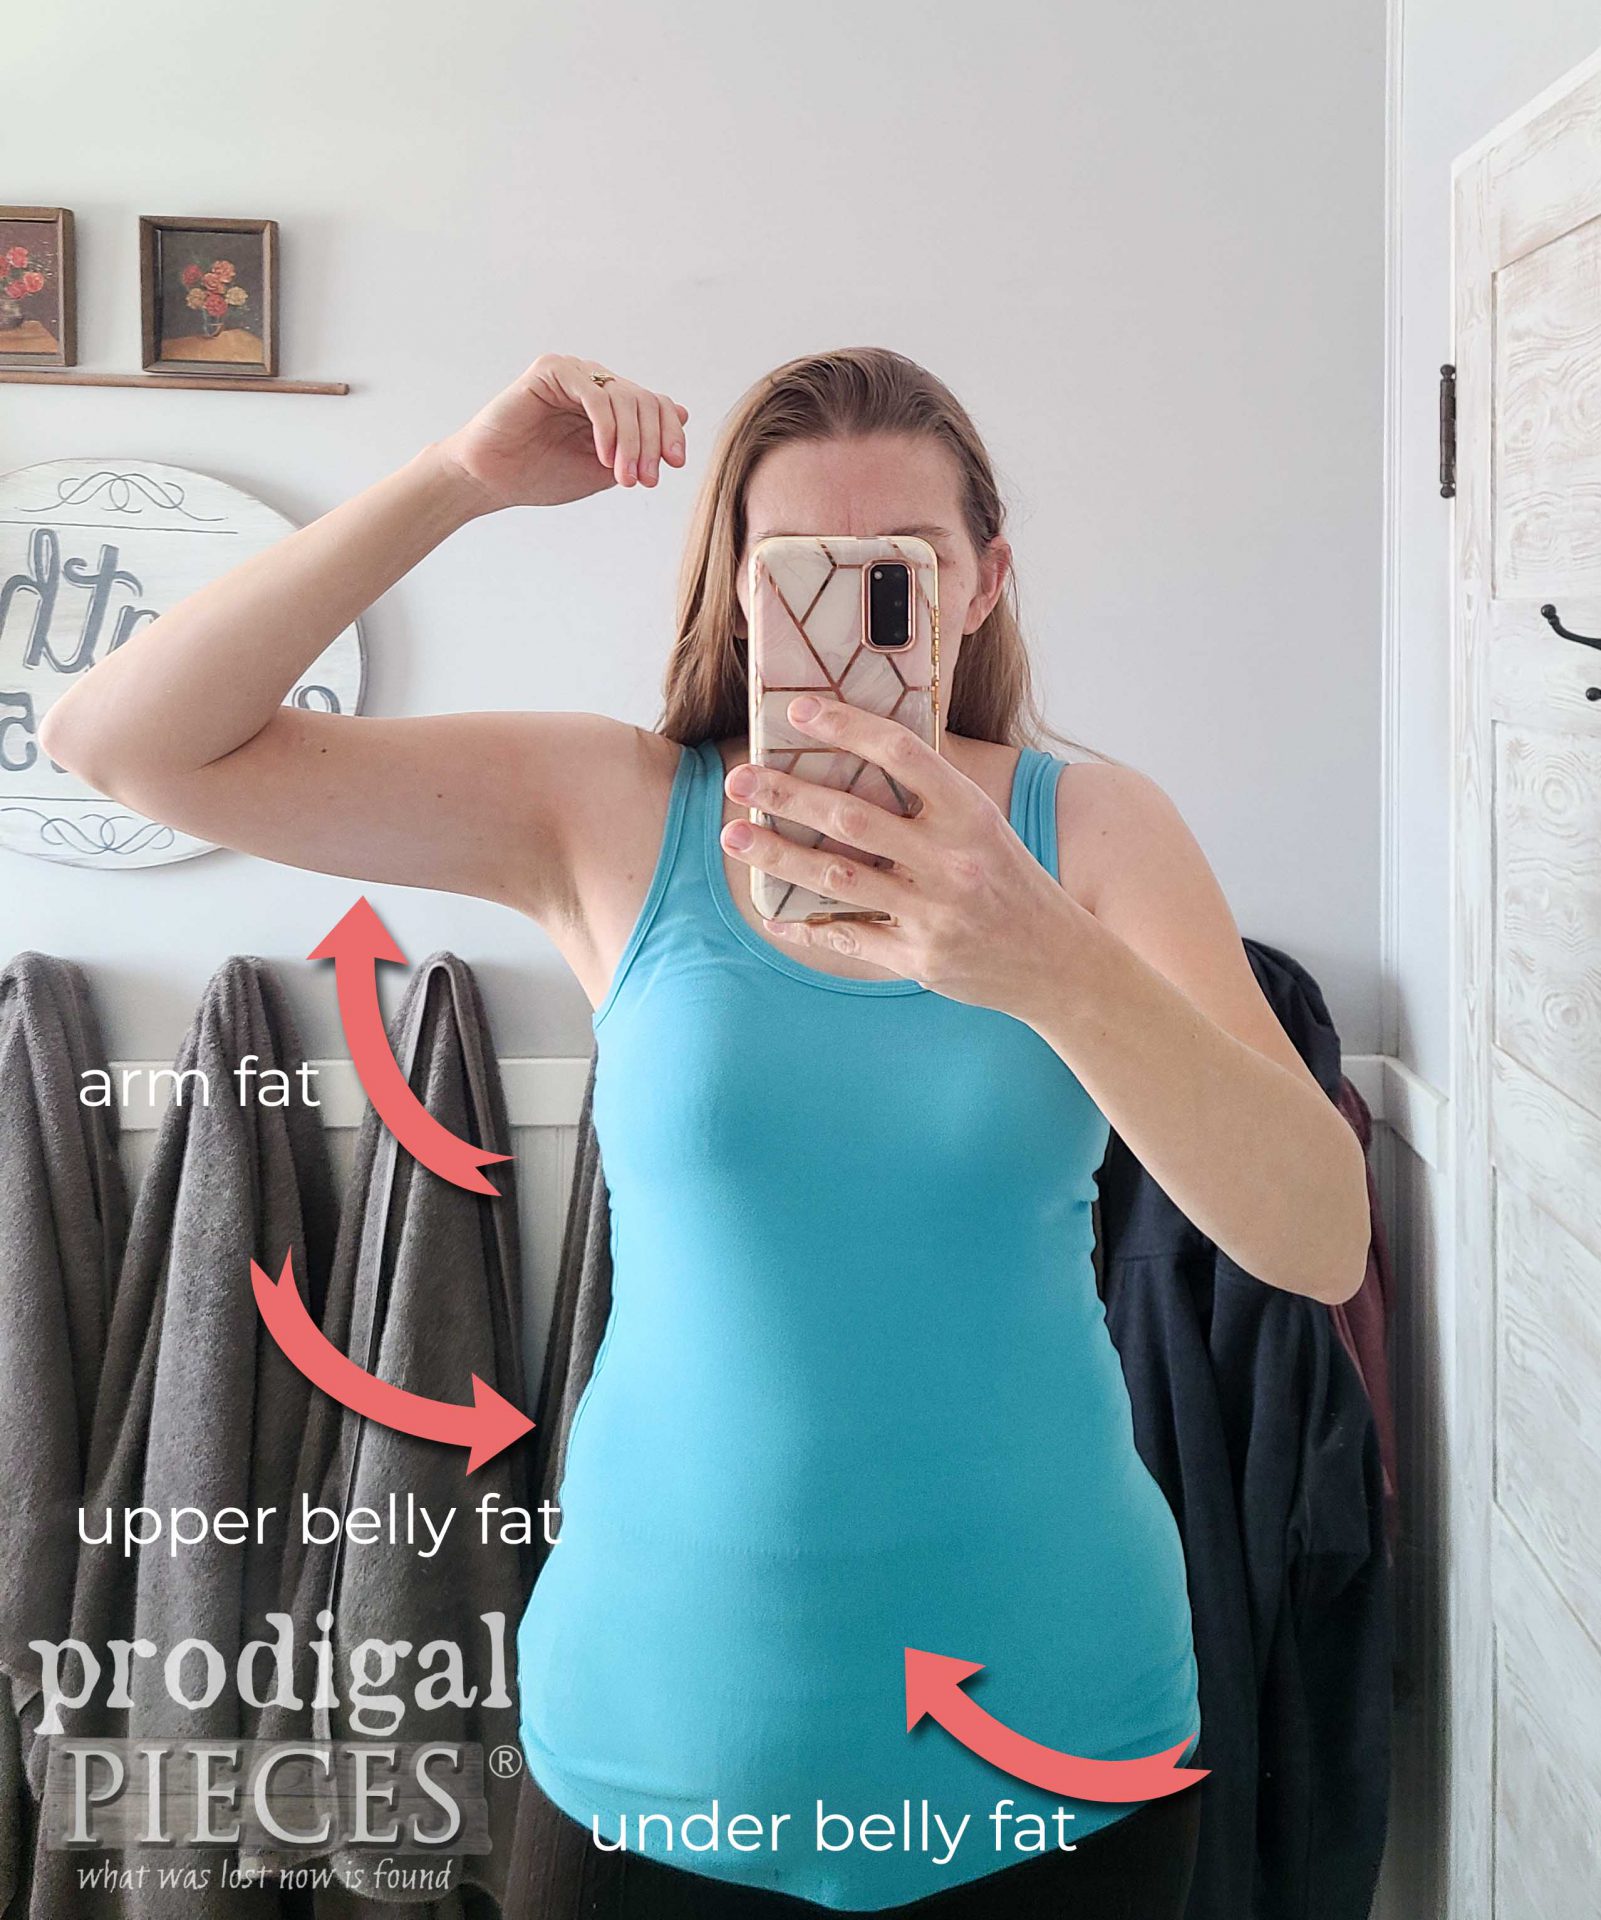 Skinny Fat Larissa at 44 years old - Mother of 8 | prodigalpieces.com #prodigalpieces #fitover40 #menopause #perimenopause